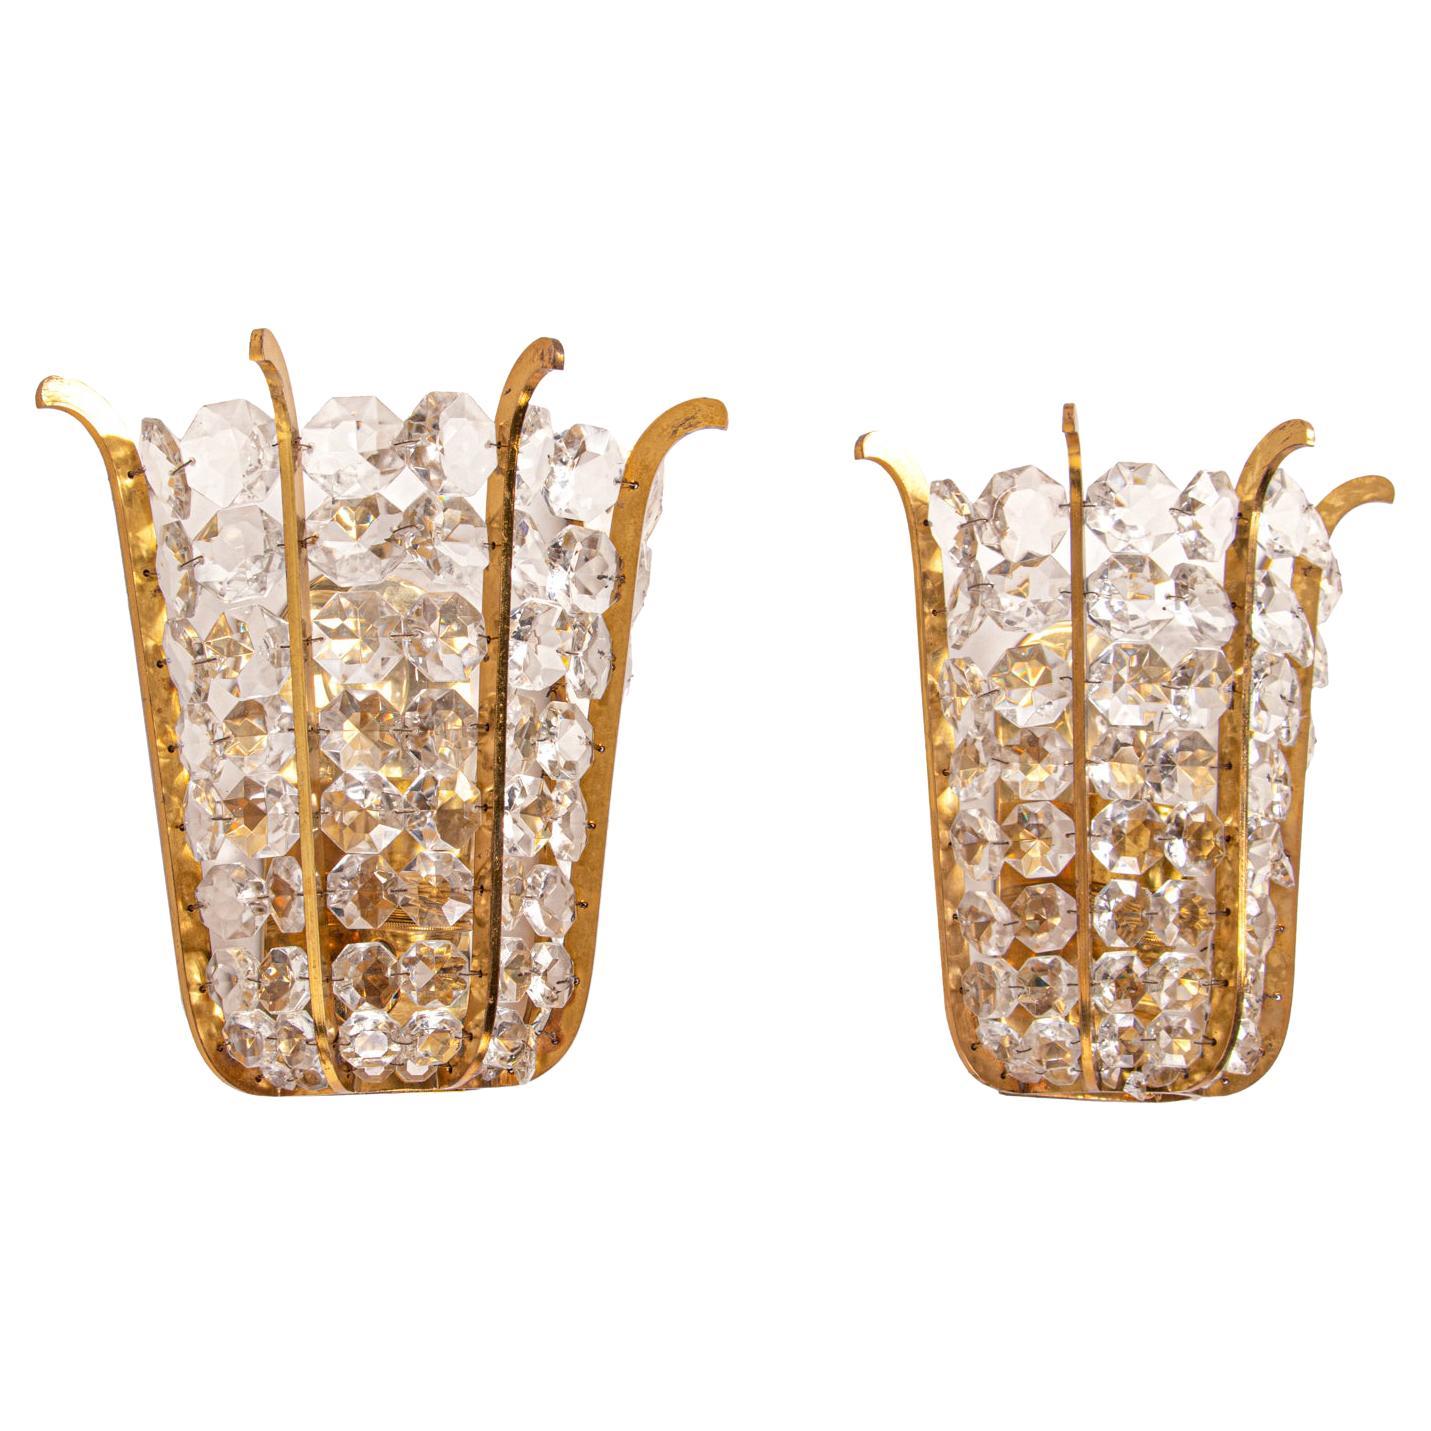 1960 Austria Bakalowits Pair of Wall Sconces Faceted Crystals & Brass